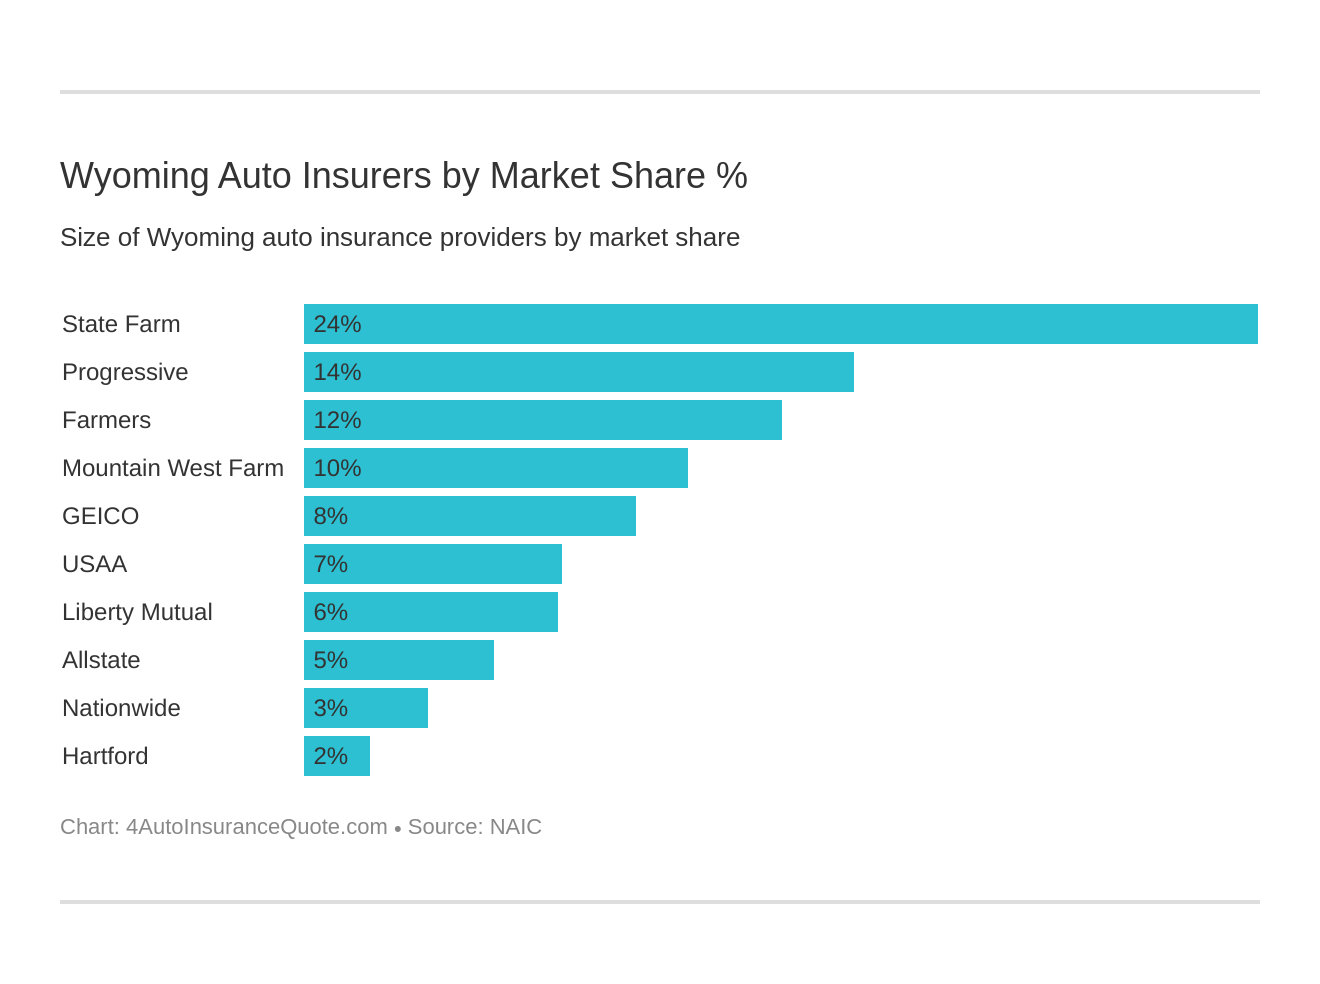 Wyoming Auto Insurers by Market Share %